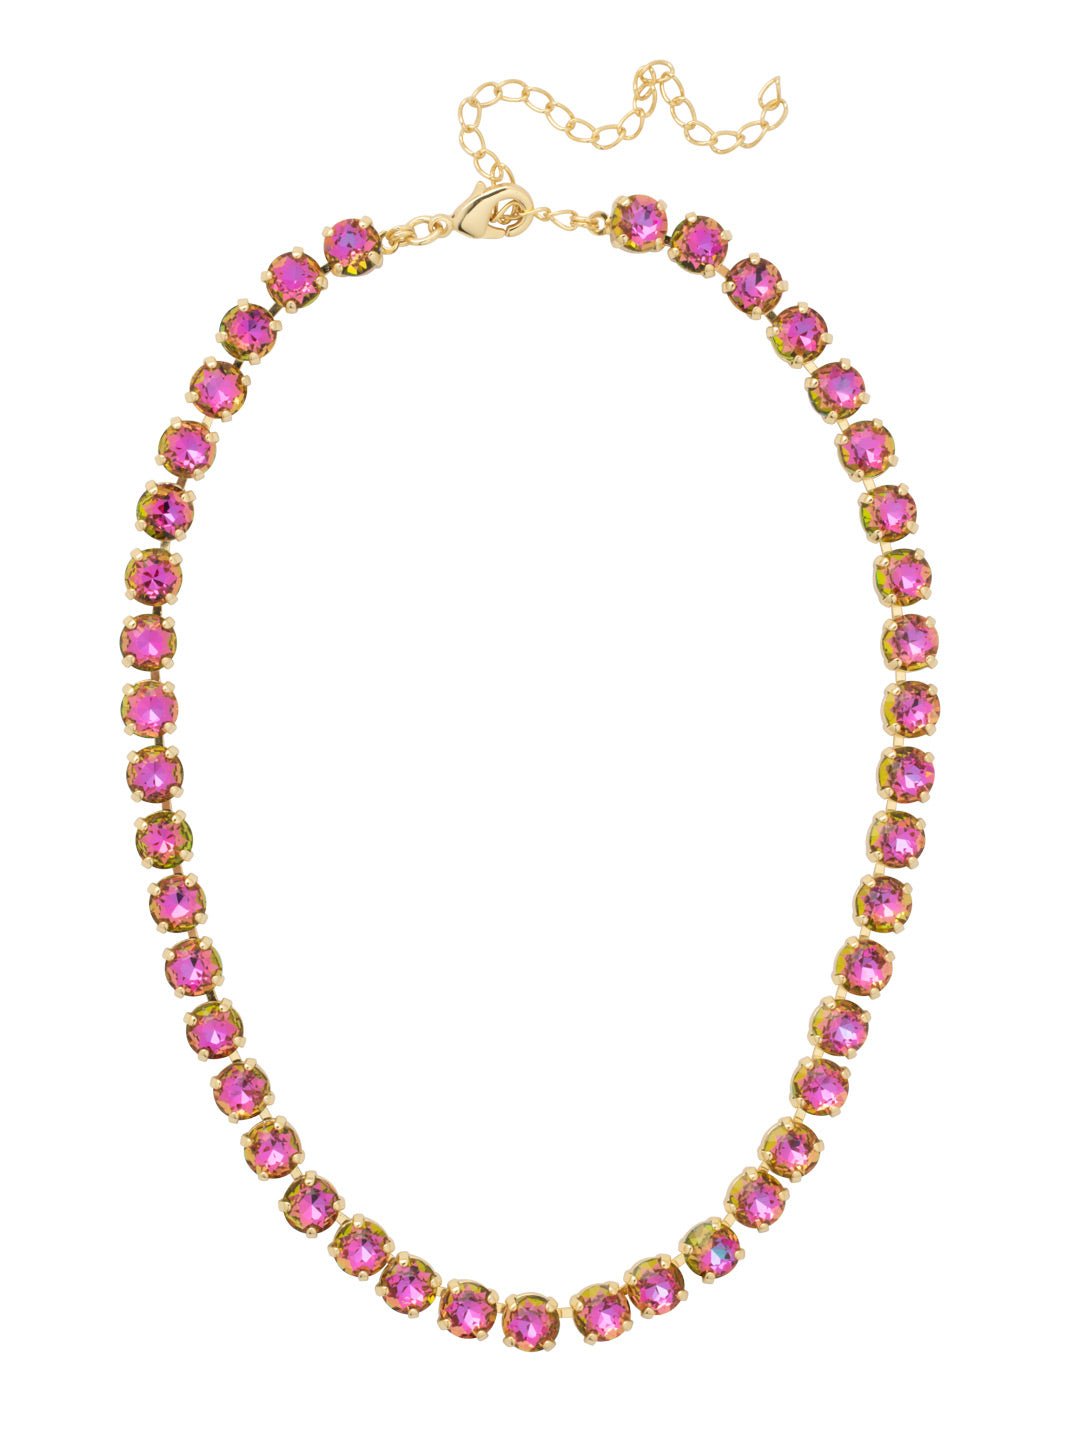 Matilda Tennis Necklace - NFJ4BGFIS - <p>The Matilda Tennis Necklace features a repeating line of round cut crystals on an adjustable chain, secured with a lobster claw clasp. From Sorrelli's Fireside collection in our Bright Gold-tone finish.</p>